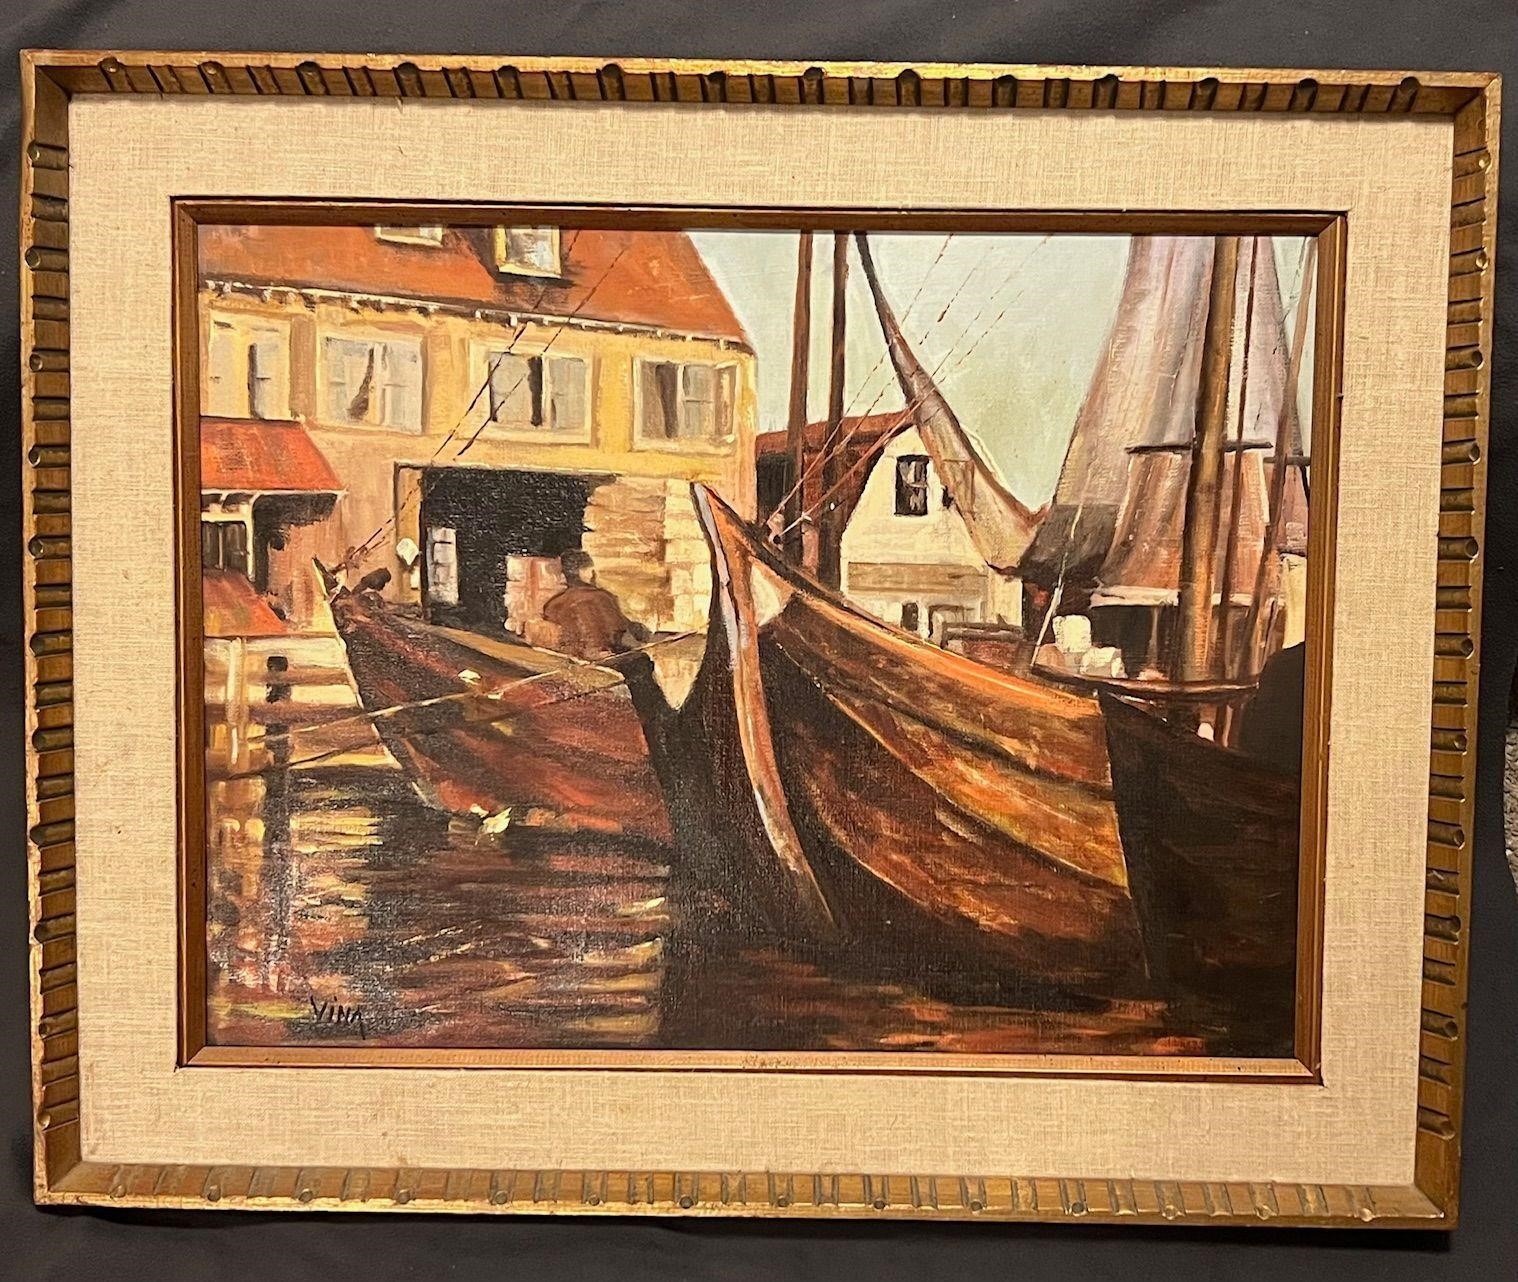 BOATS OIL PAINTING- BY VINA (30in x 24 in)